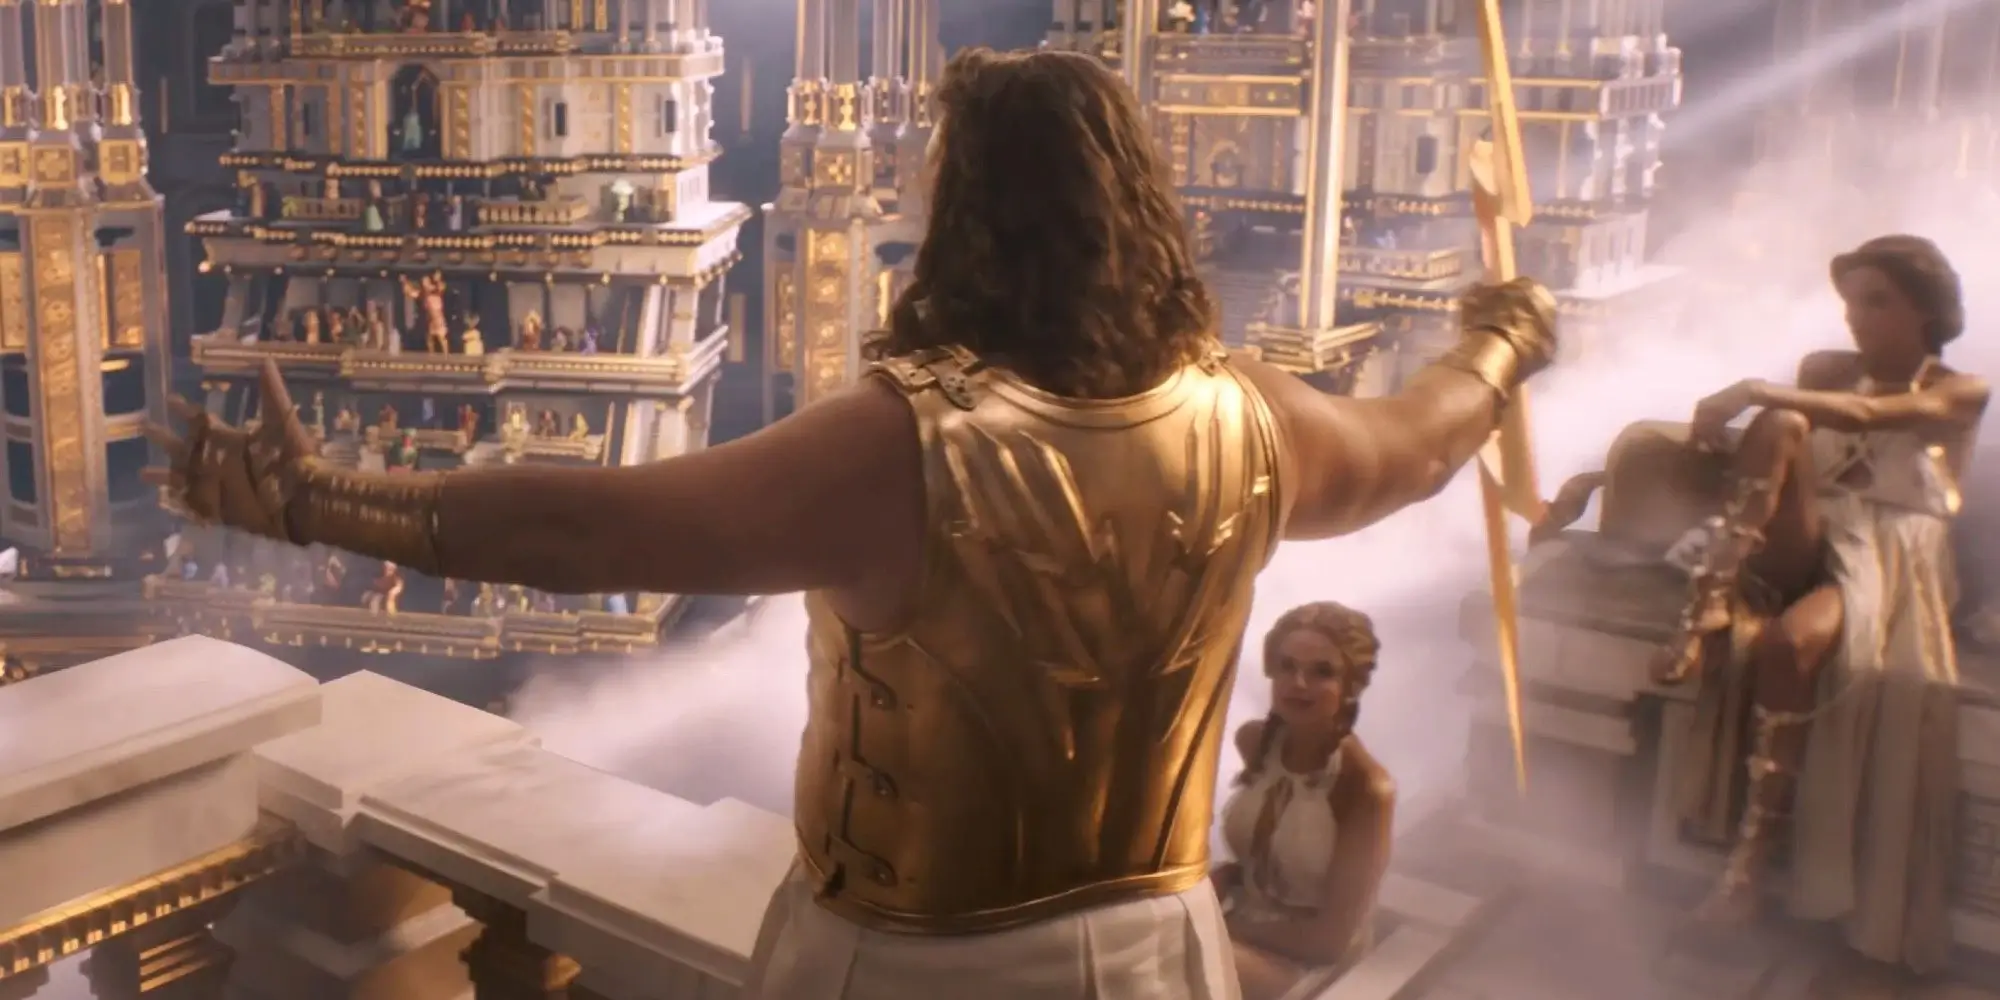 Russell Crowe As Zeus in Love and Thunder